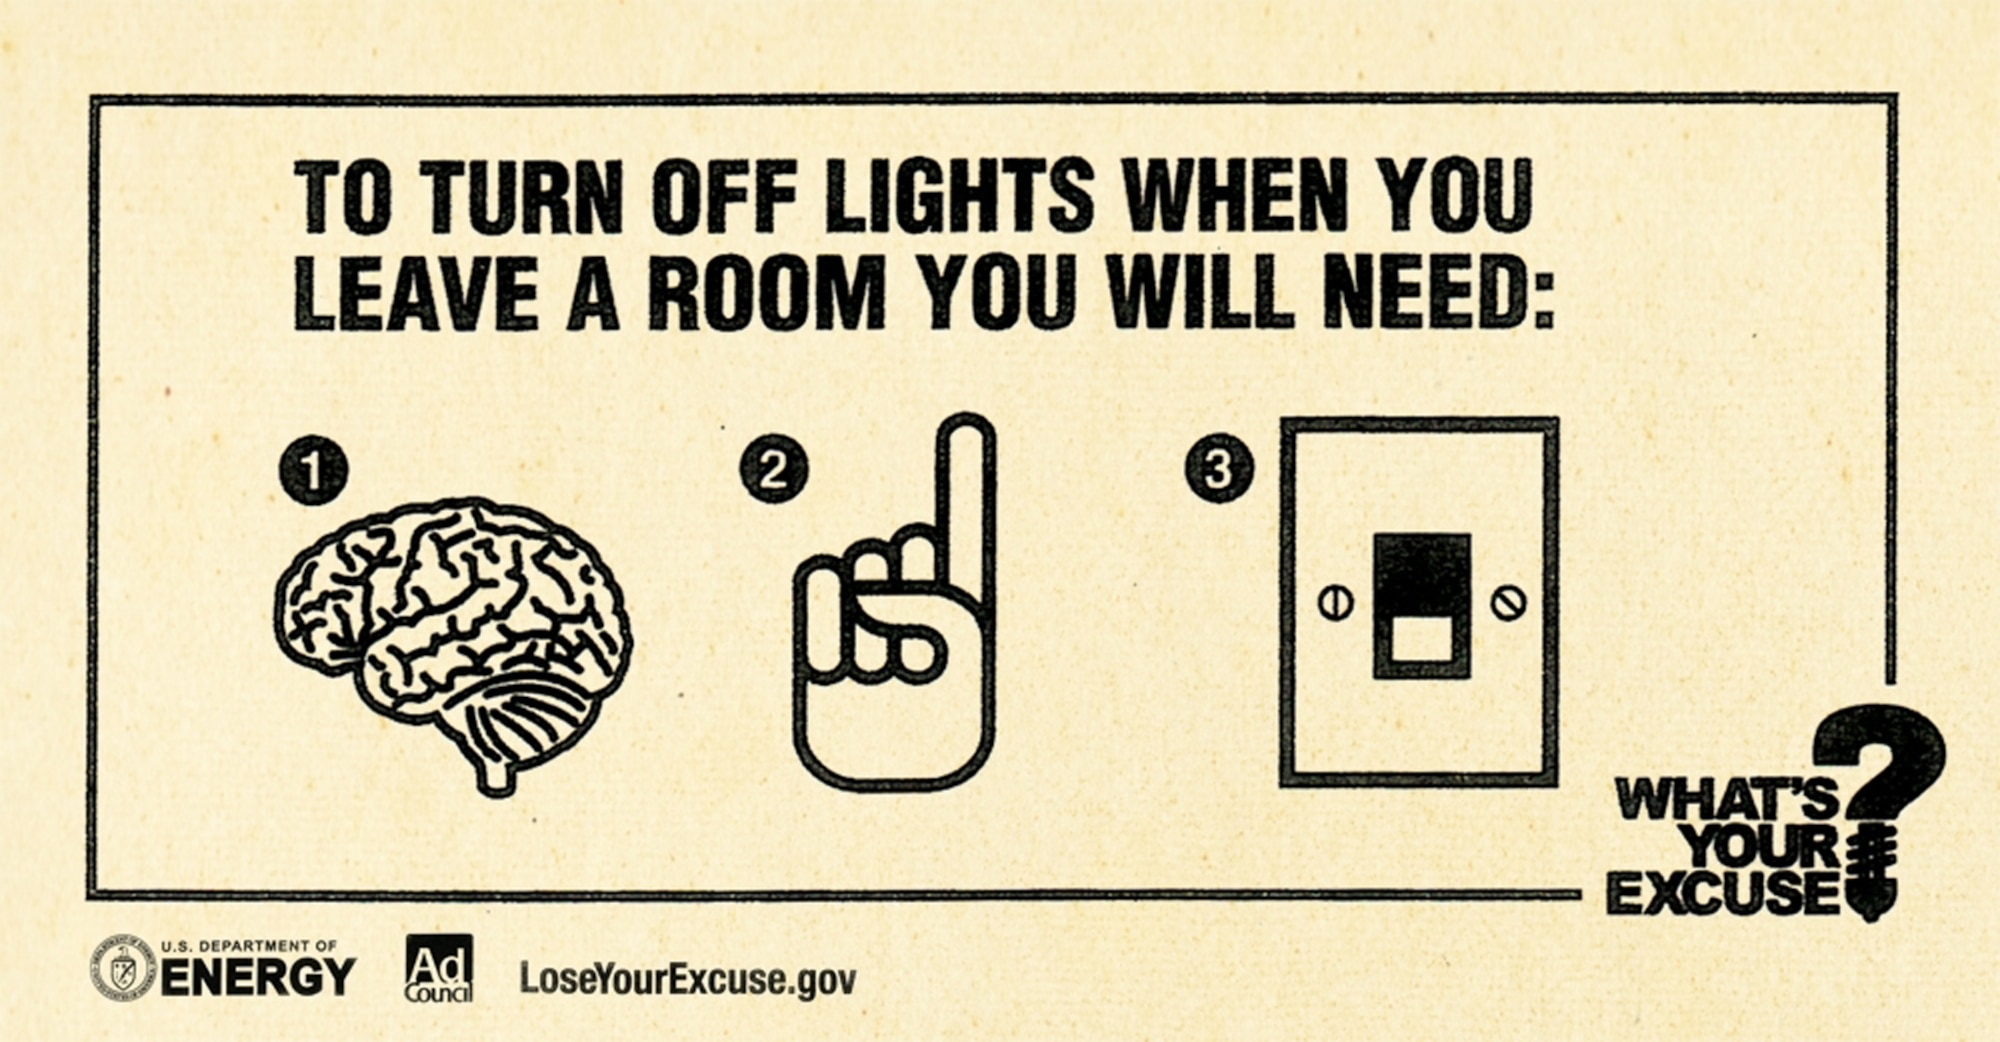 Energy Conservation.  Last one turn off the light.  (U.S. Department of Energy graphic)